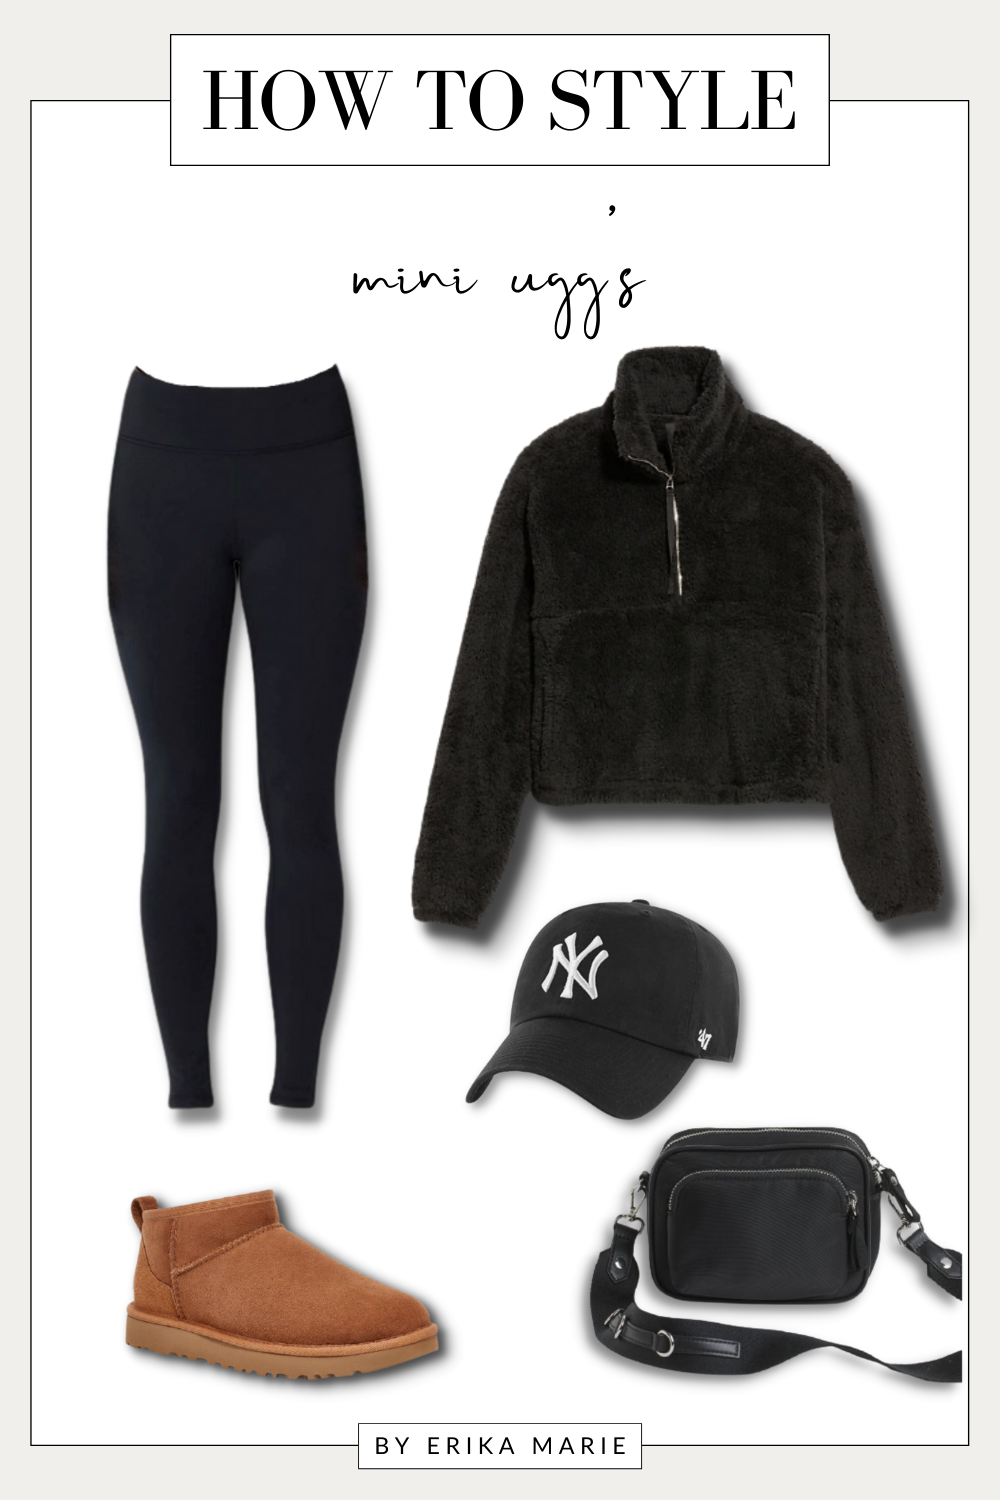 how to style mini uggs